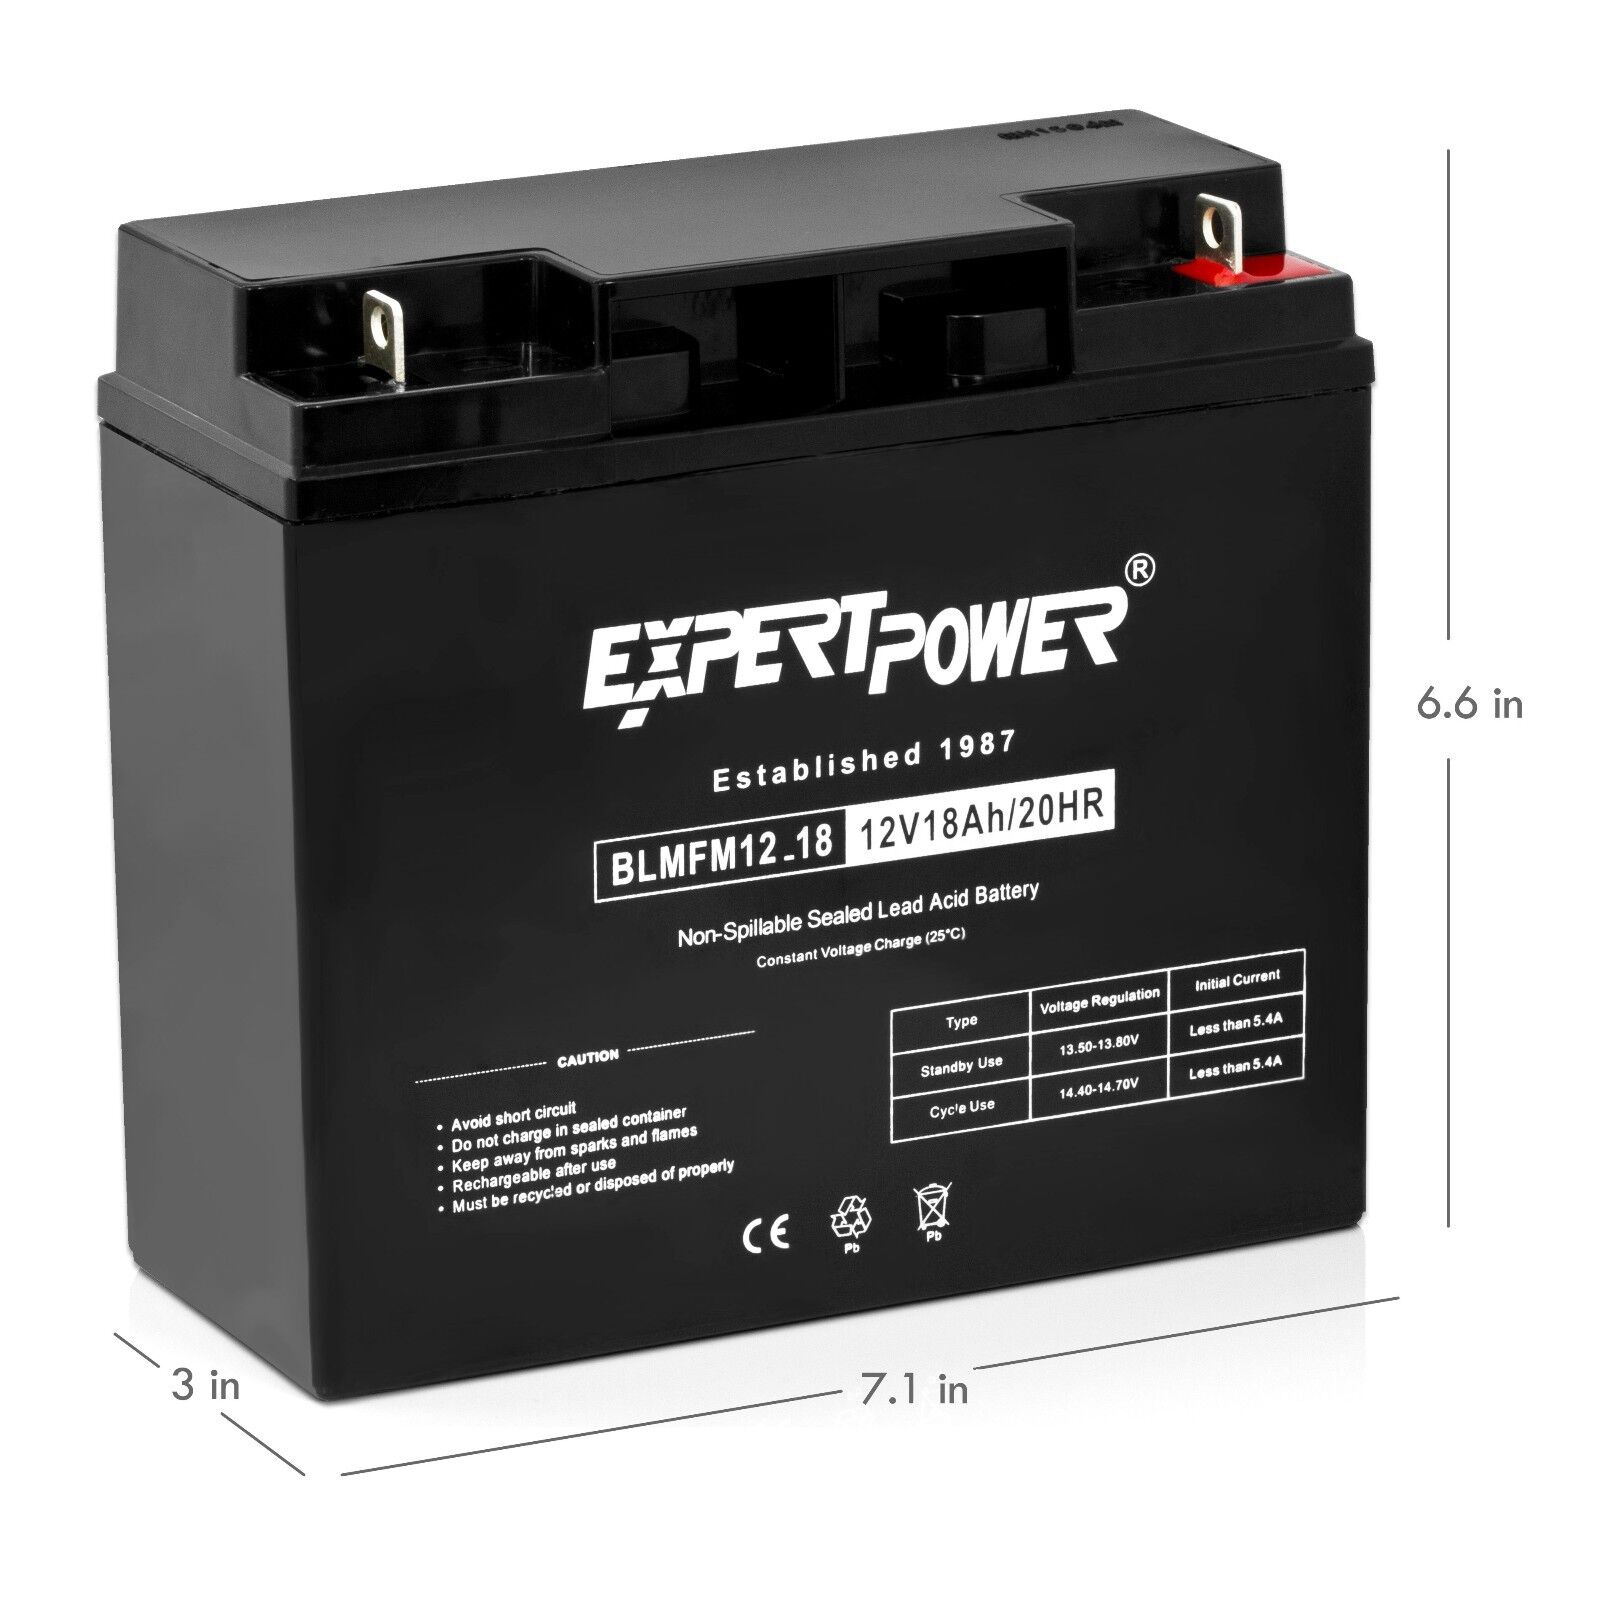 2 PACK Expert Power APC RBC7 Cartridge Battery Replacement for UPS Backup System ExpertPower EXP12180 - фотография #5